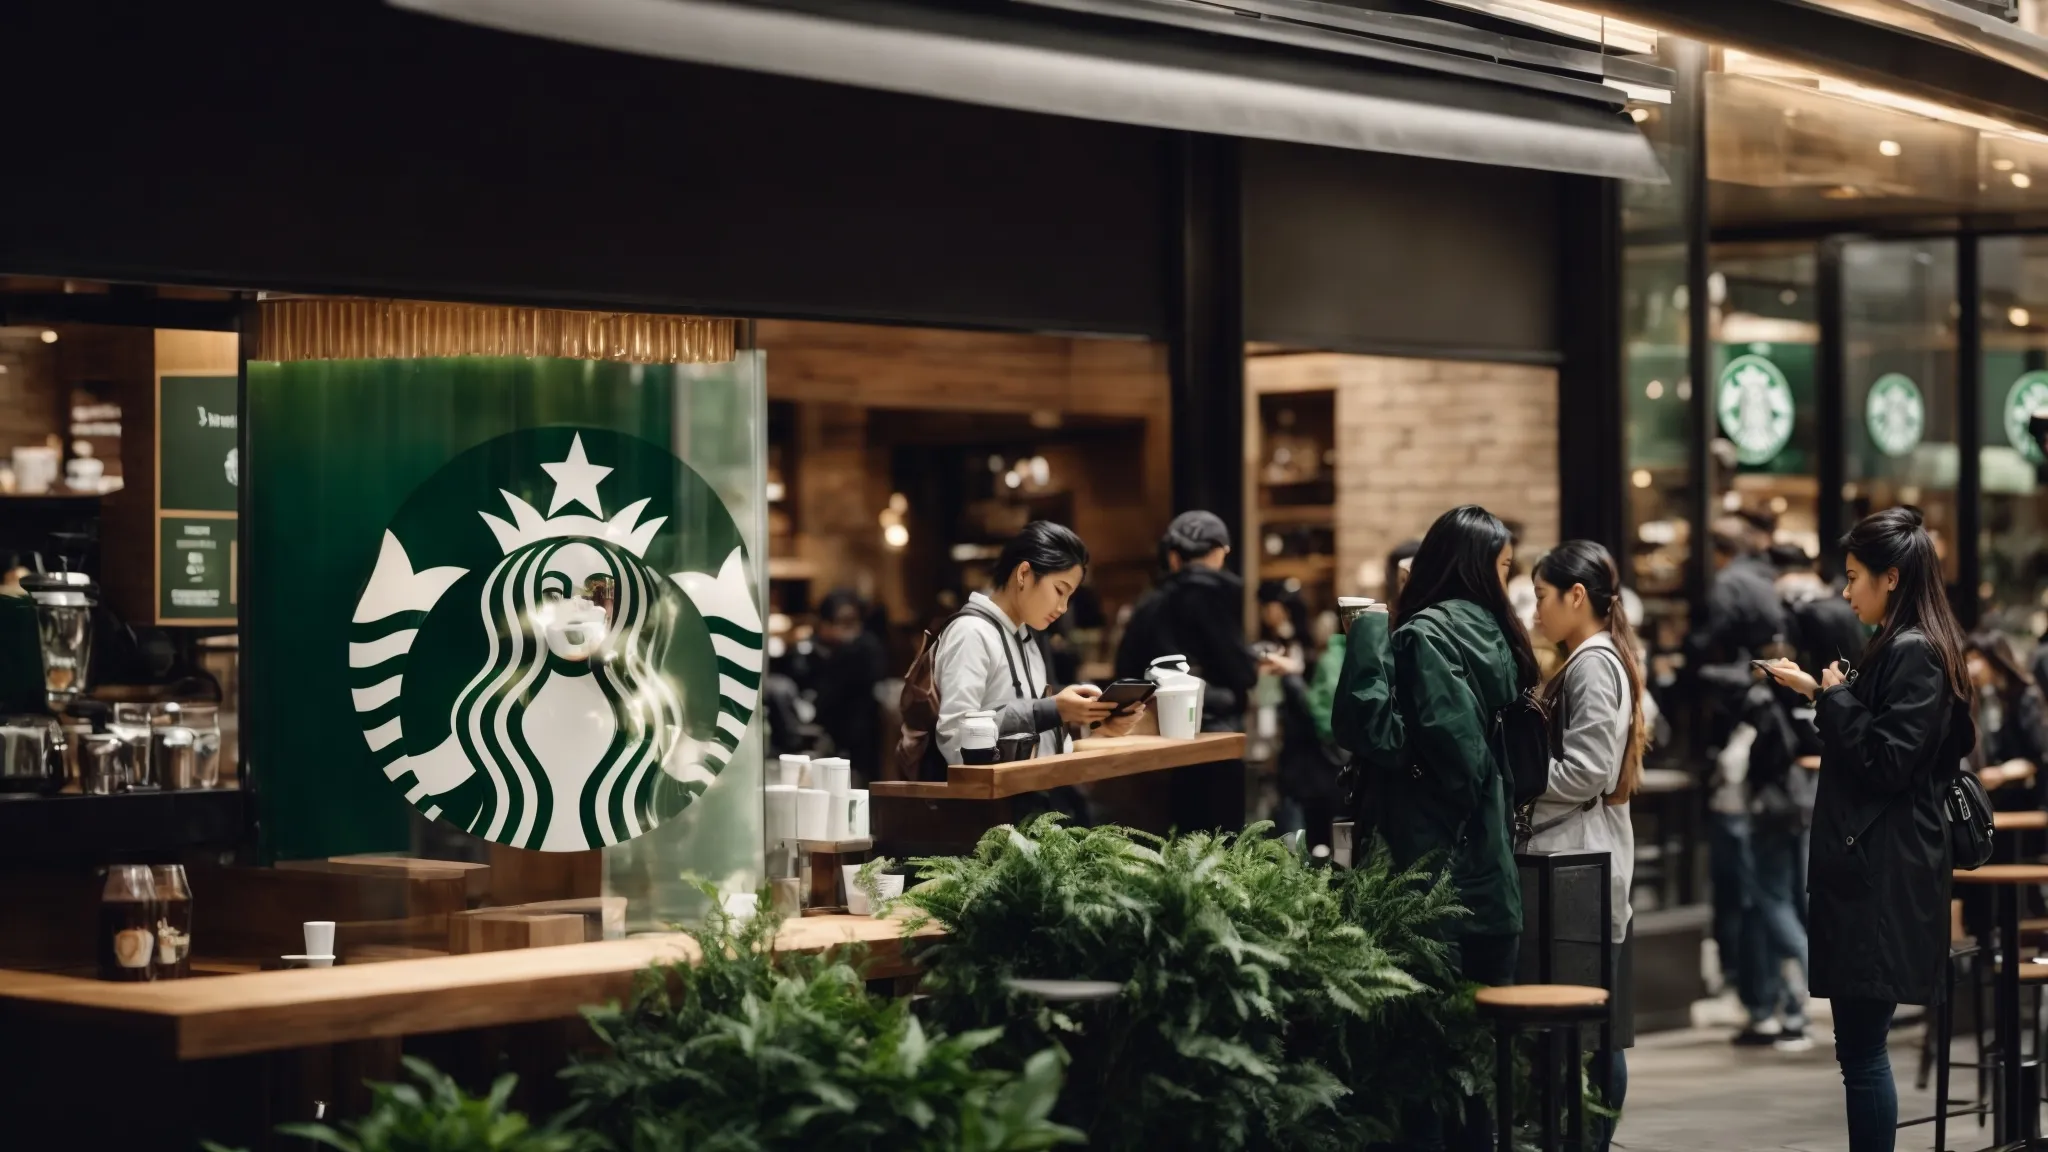 a starbucks coffee shop bustling with customers engaging on their smartphones, while sharing a glance with the recognizable green and white logo.